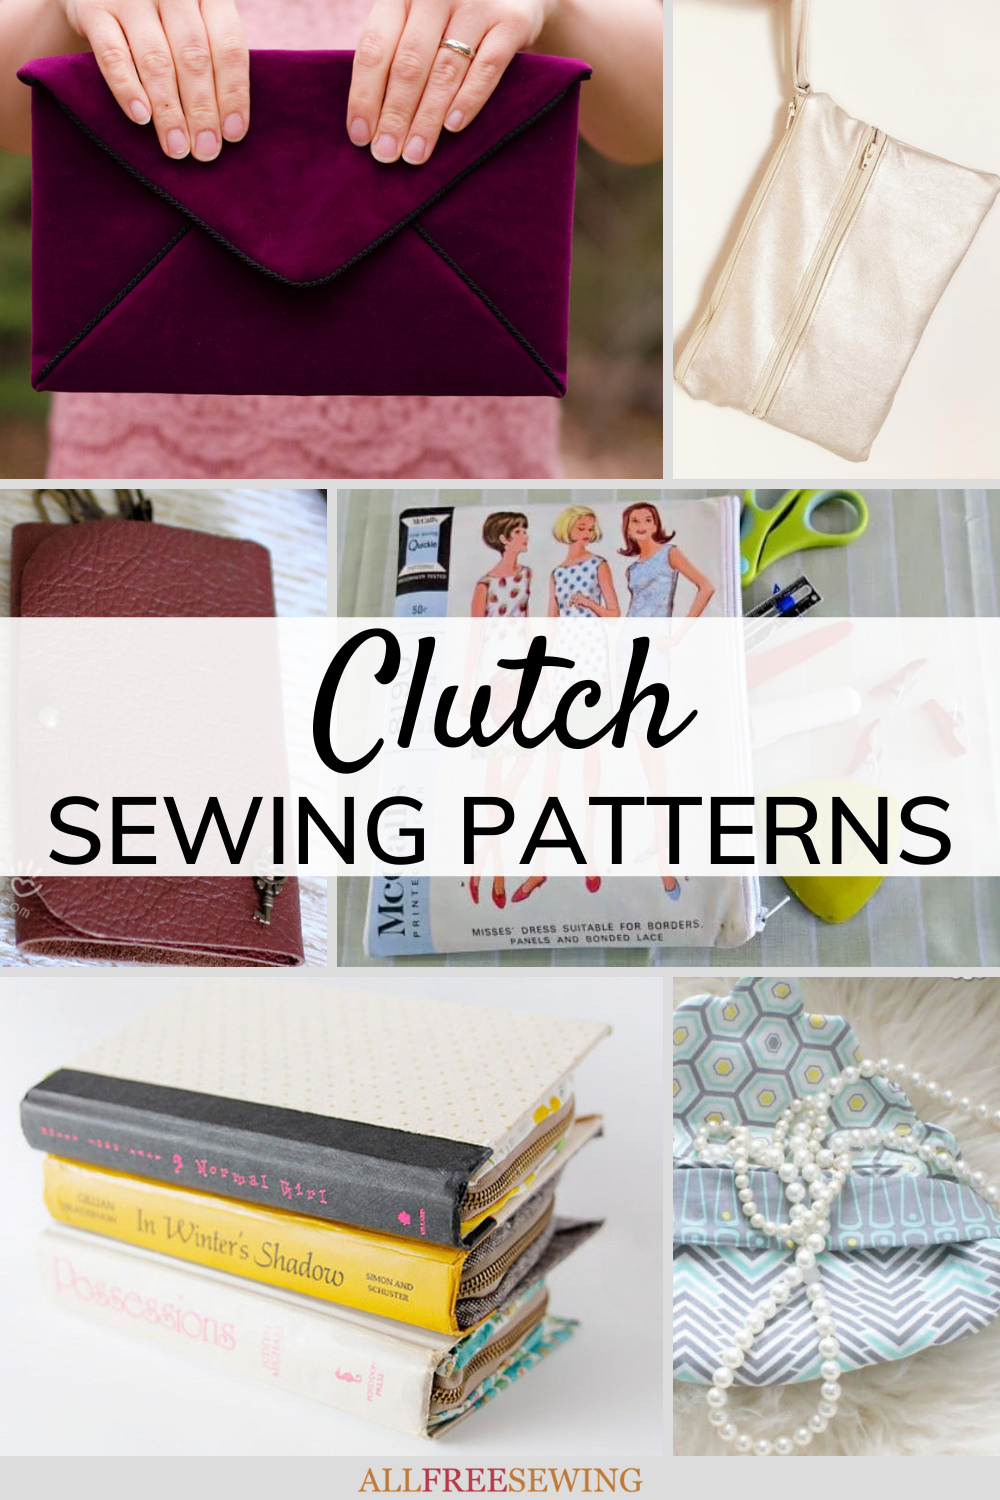 The Valencia Clutch Sewing Pattern, by Seamwork